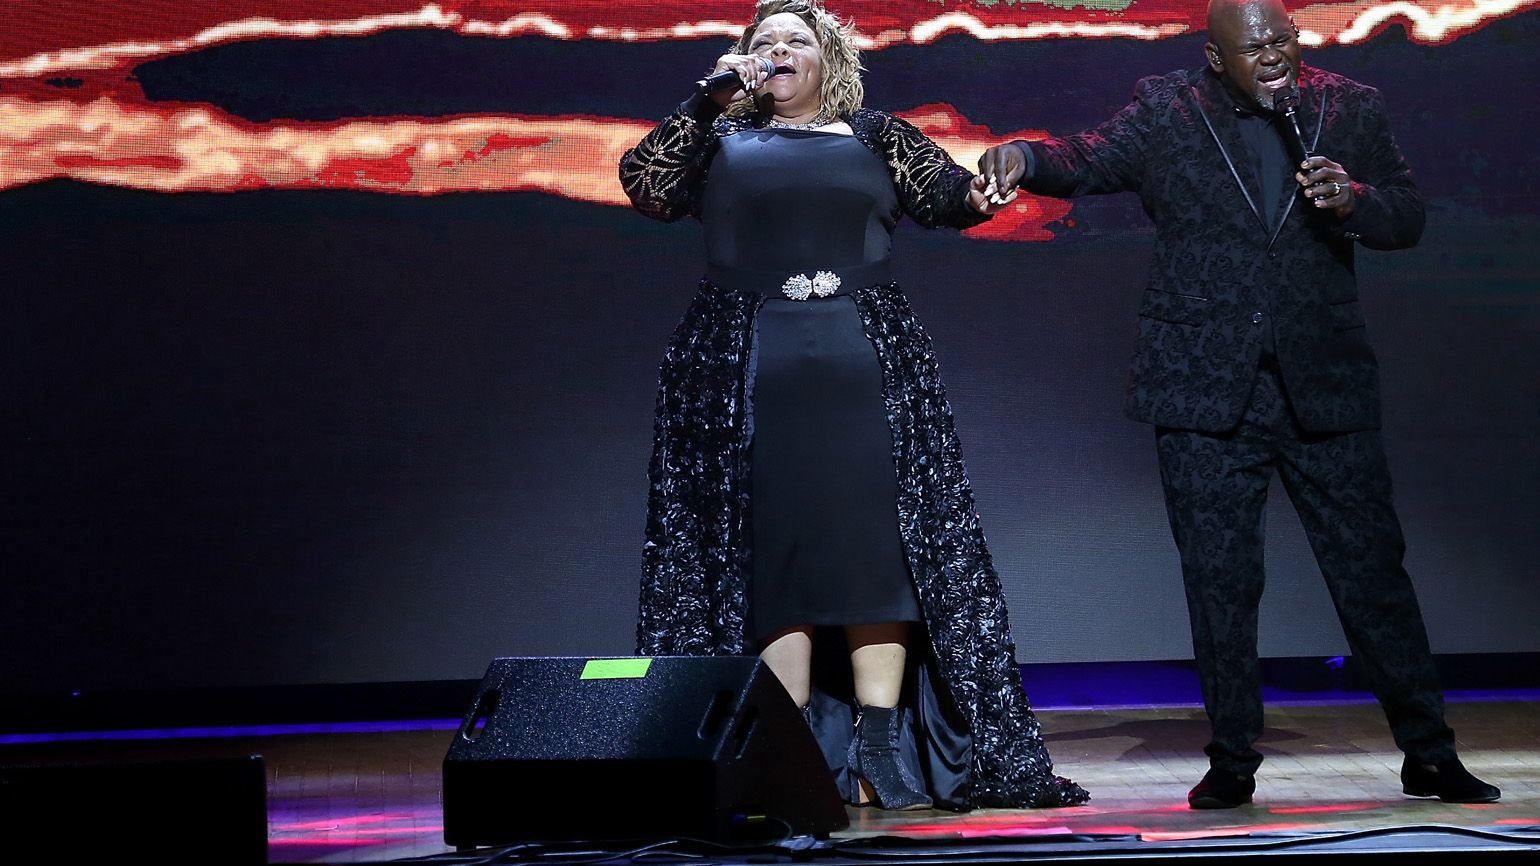 David and Tamela perform during their "Us Against The World' tour.